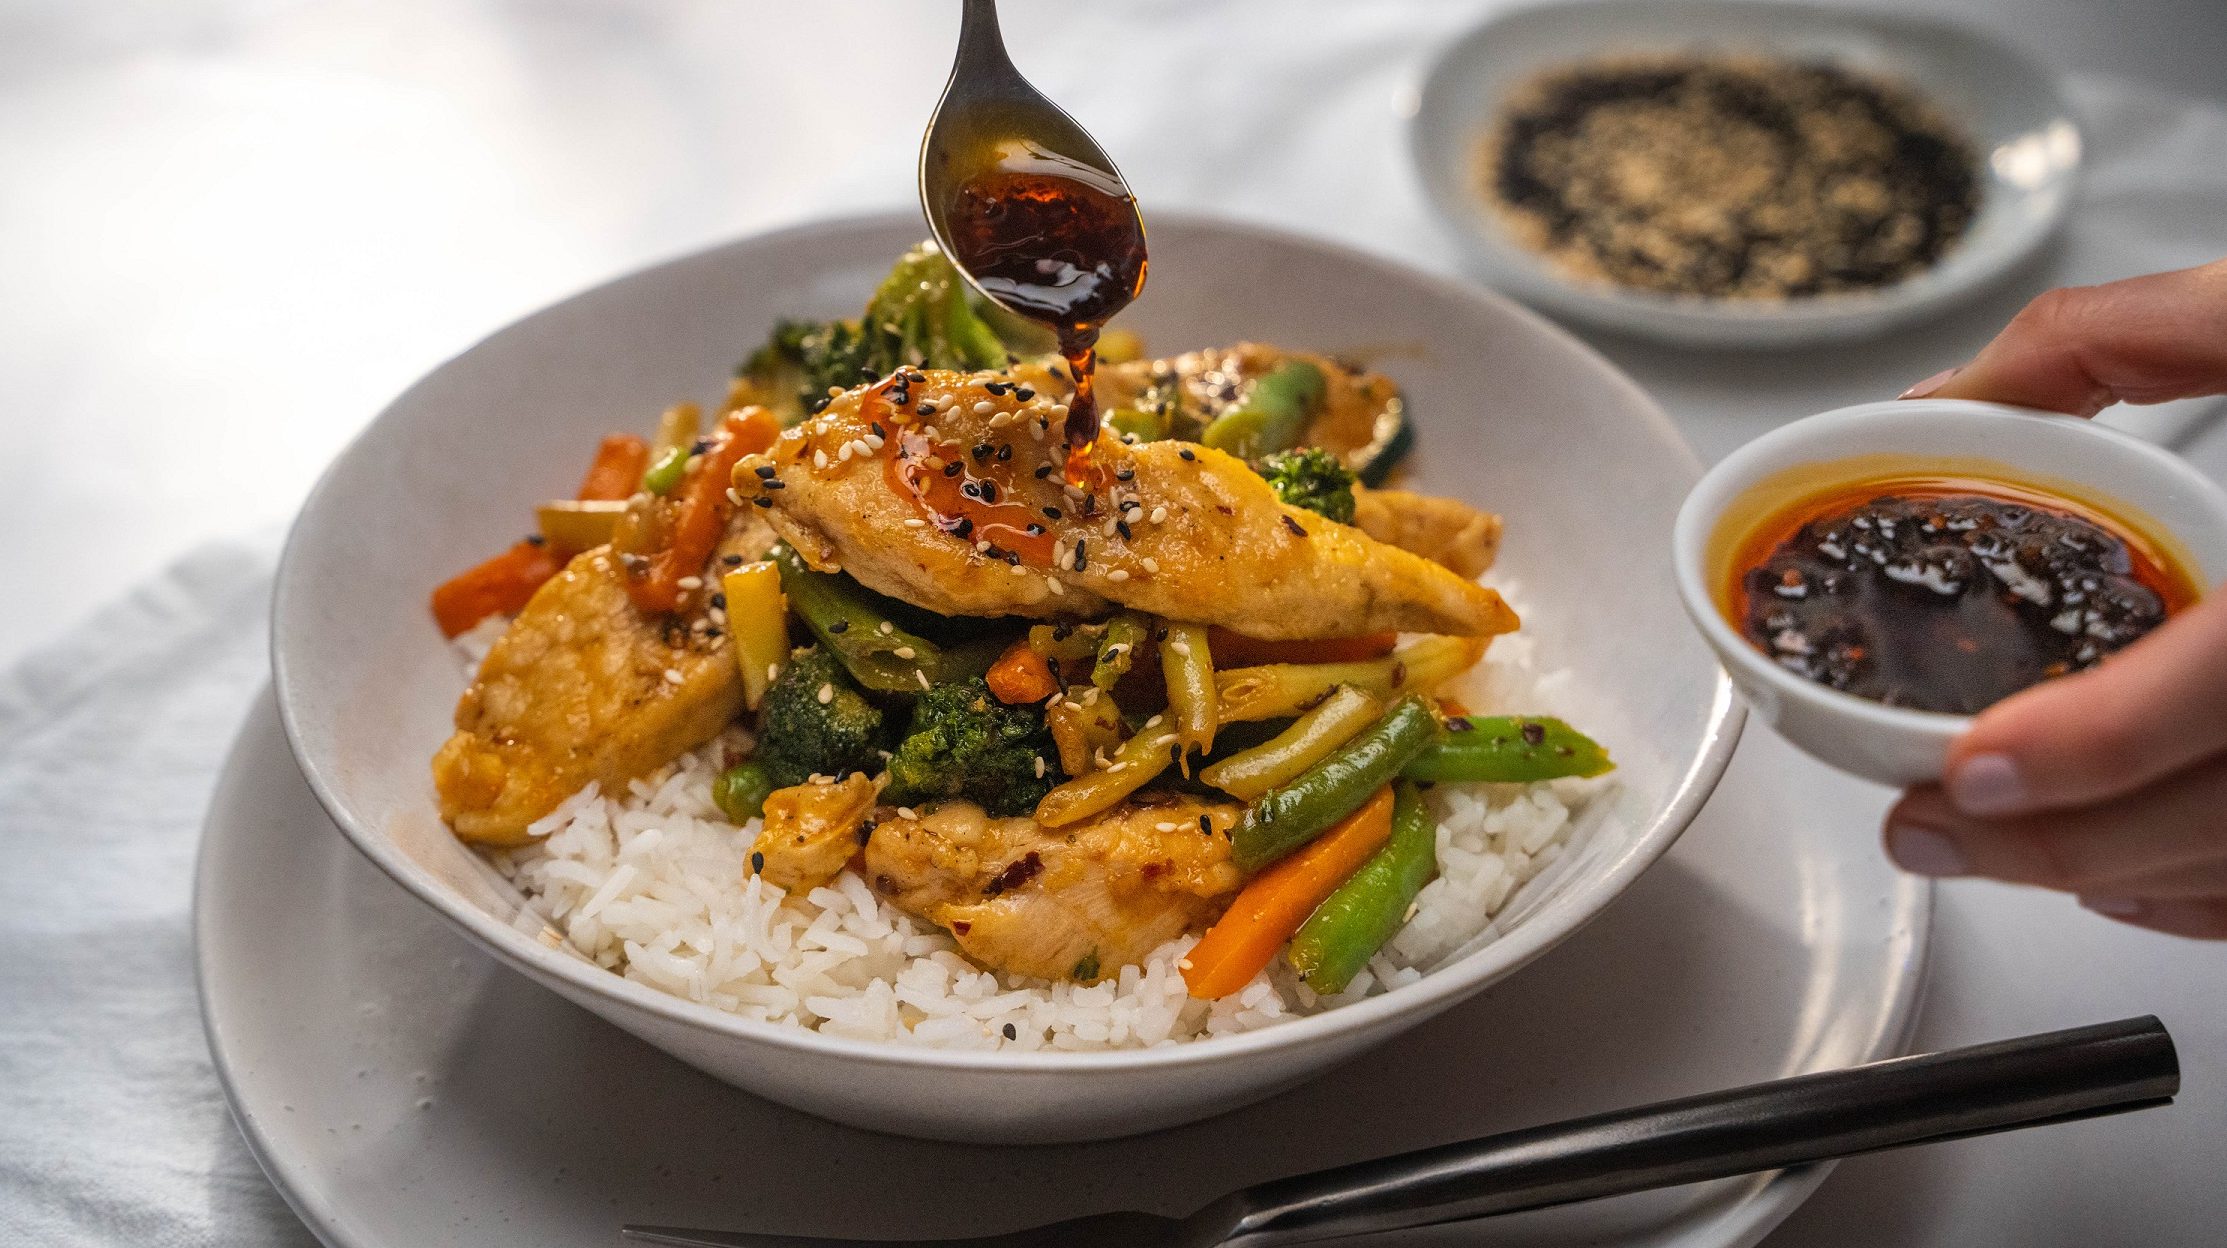 A bowl of chicken and vege stir-fry on white rice, pouring chill sauce with a spoon.